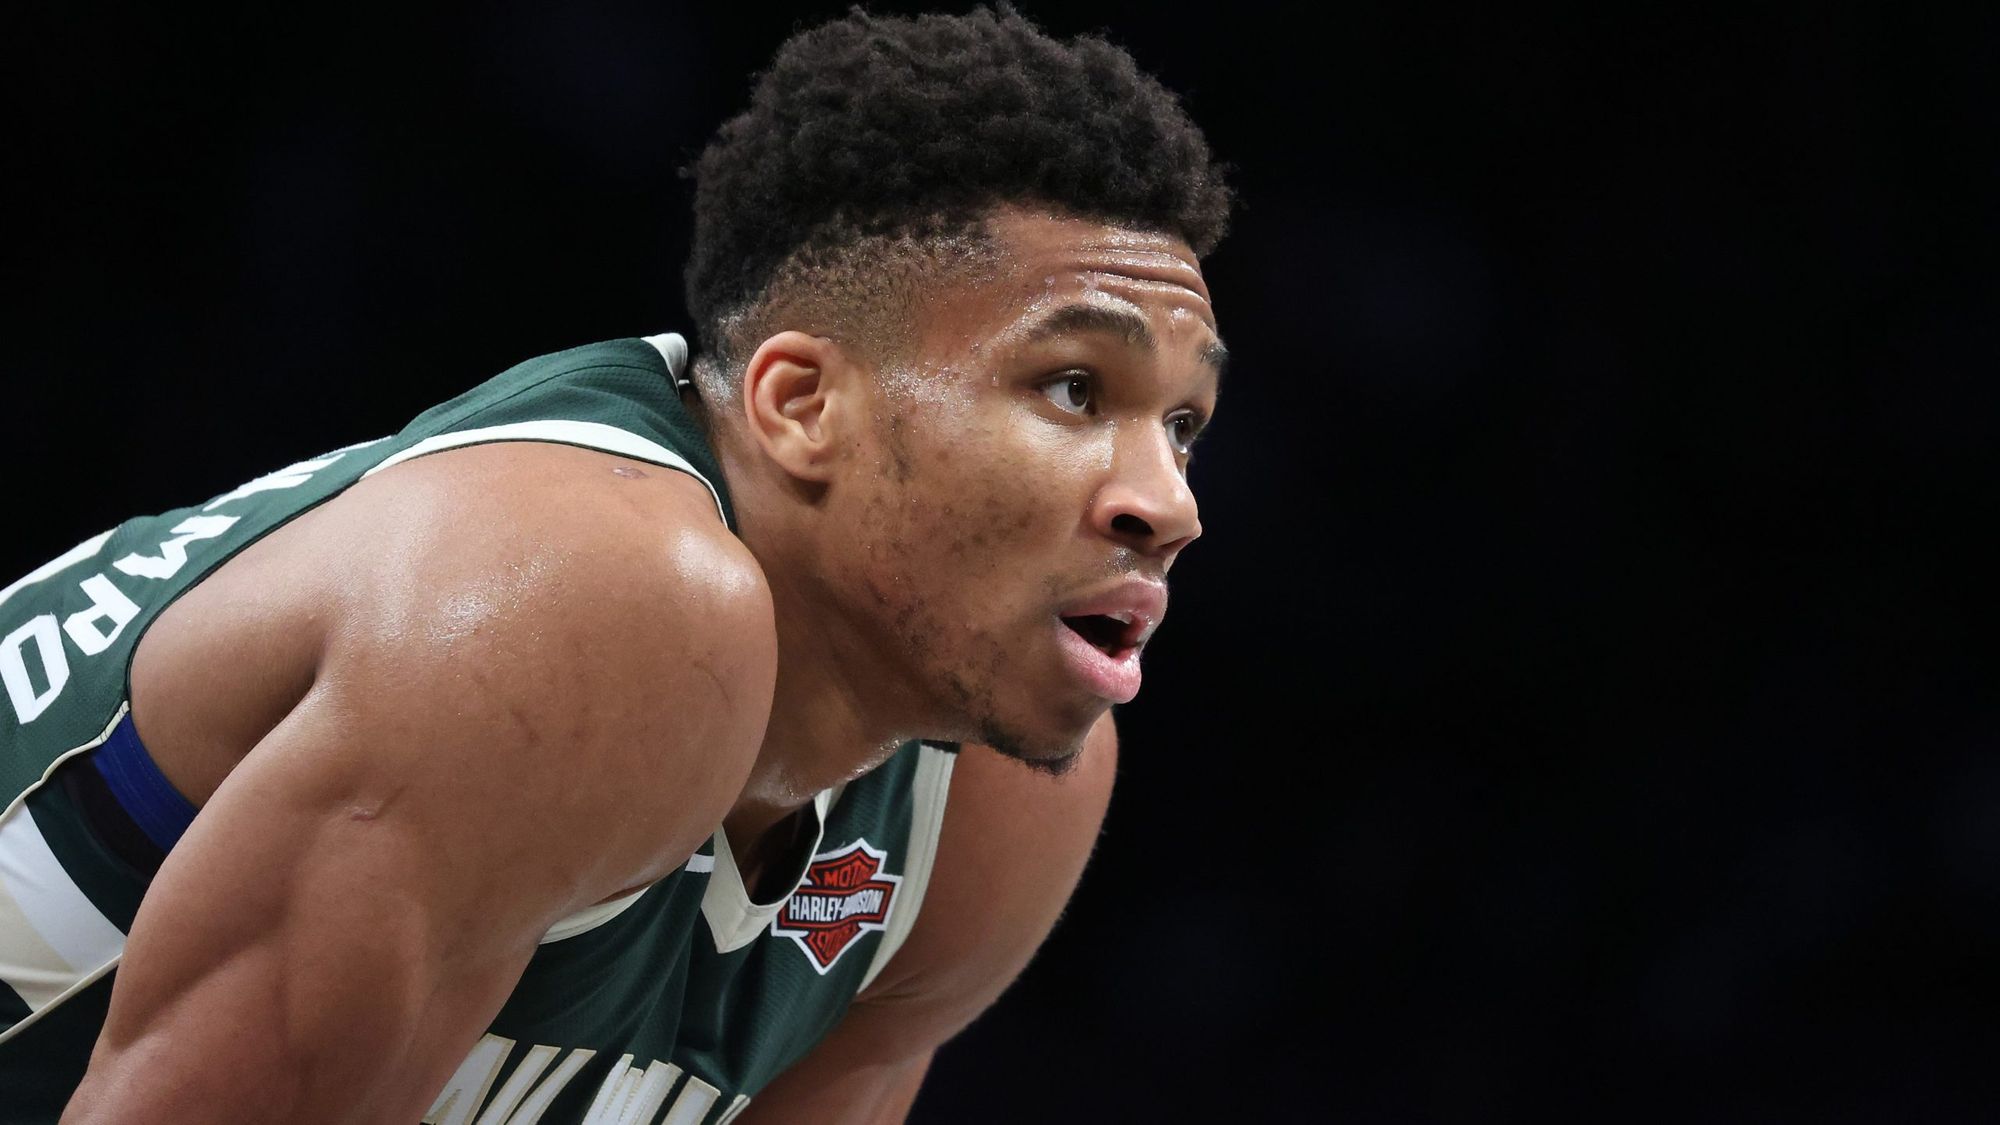 NBA Free Agency News: Knicks May Be Reaching Too Far With Giannis Plans